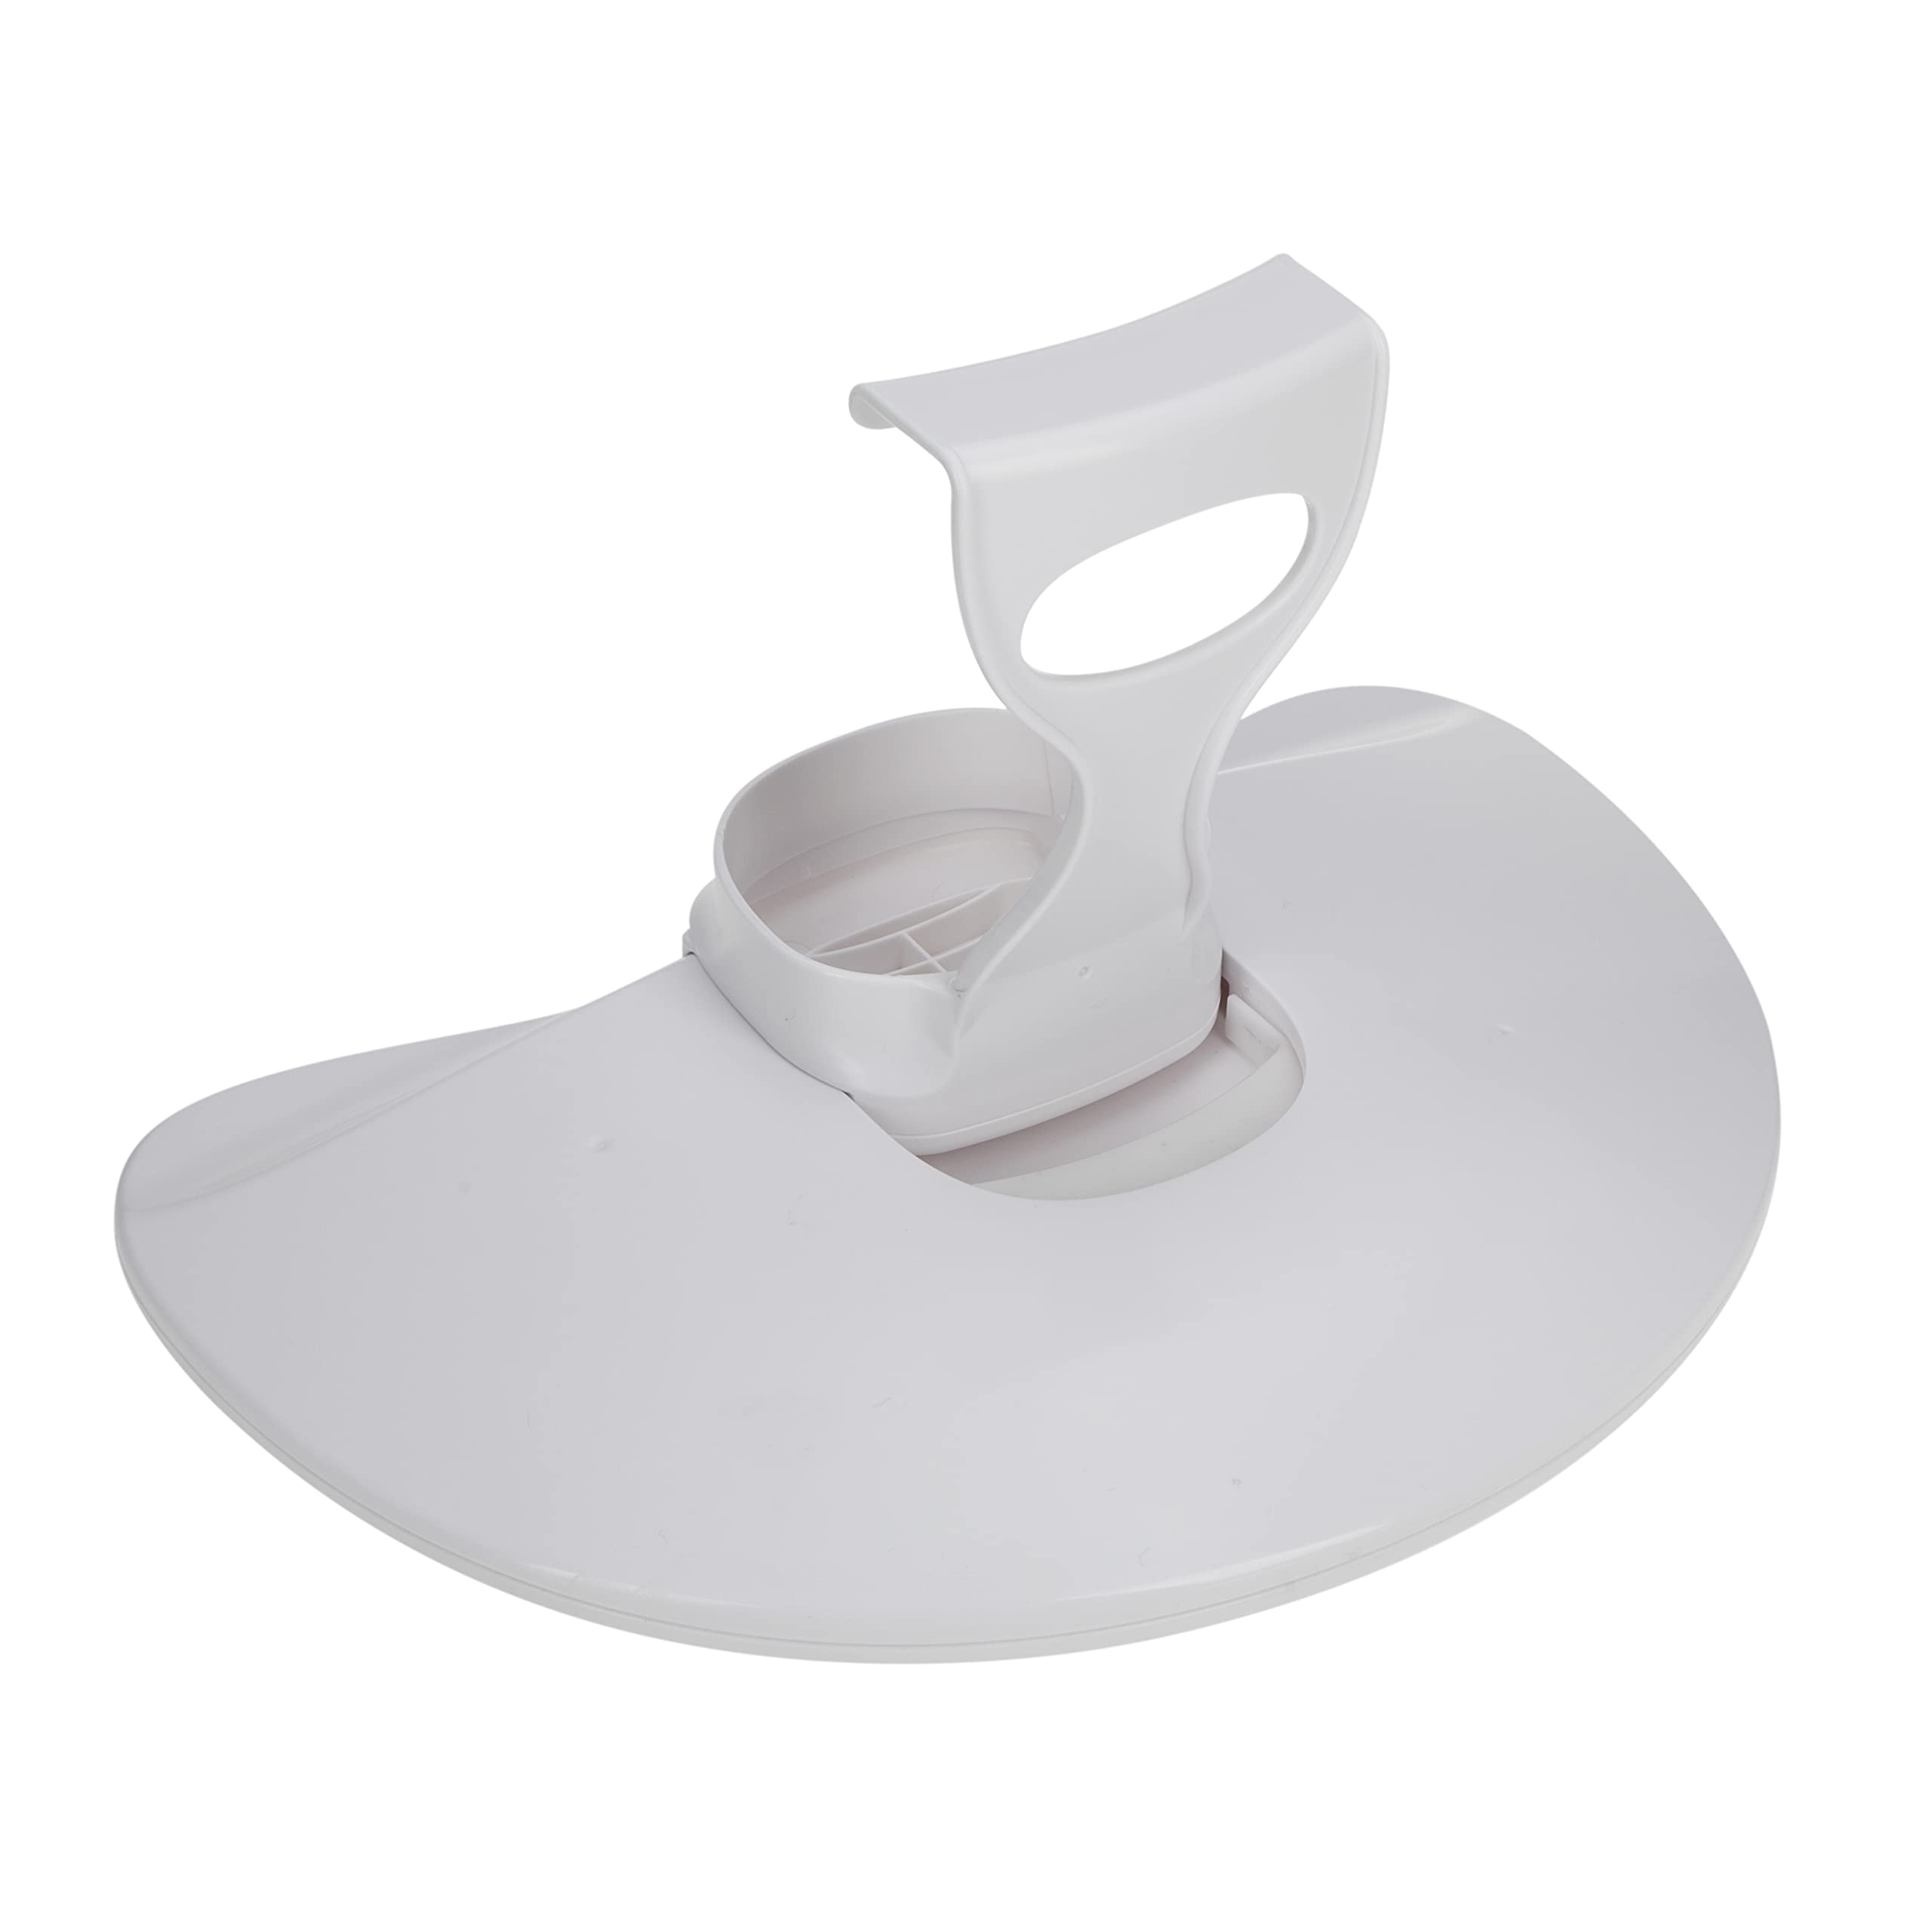 Nuby My Floor Seat Activity Tray with Easy Release Latch, Easy to Clean, for Ages 4-12 Months